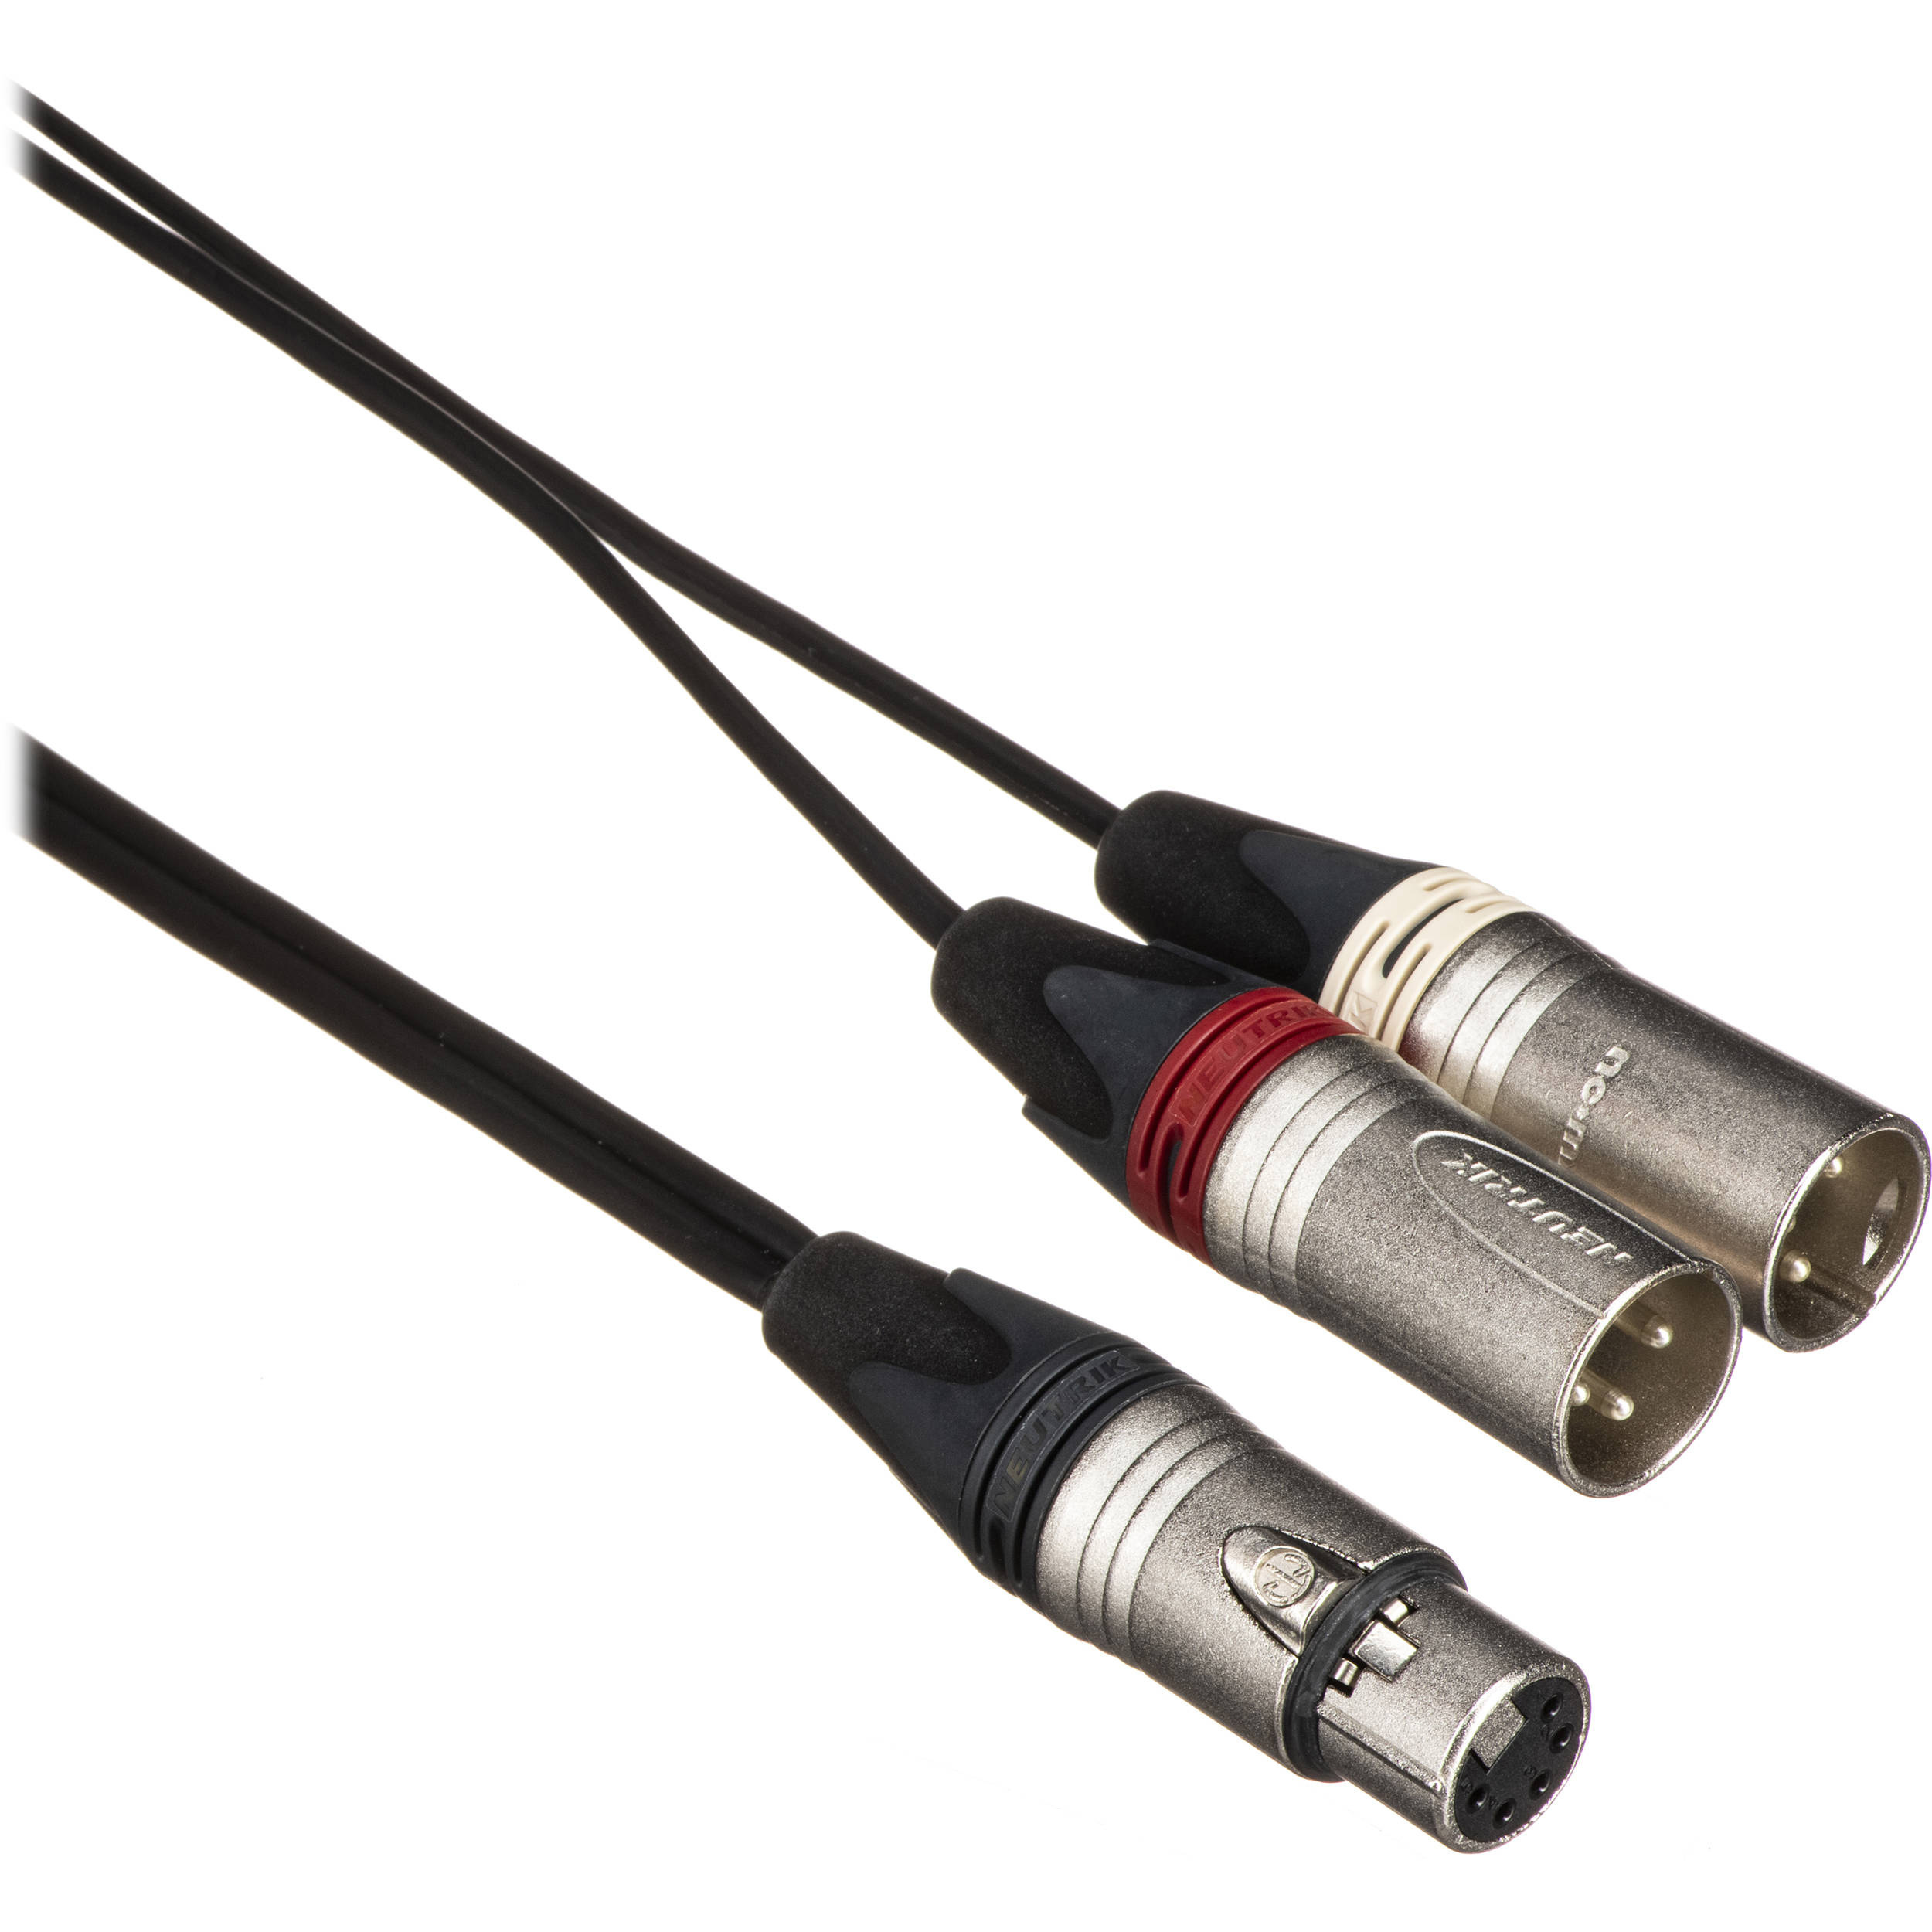 Sony EC05X5F3M 5-Pin to Dual 3-pin XLR Cable for ECM-680S